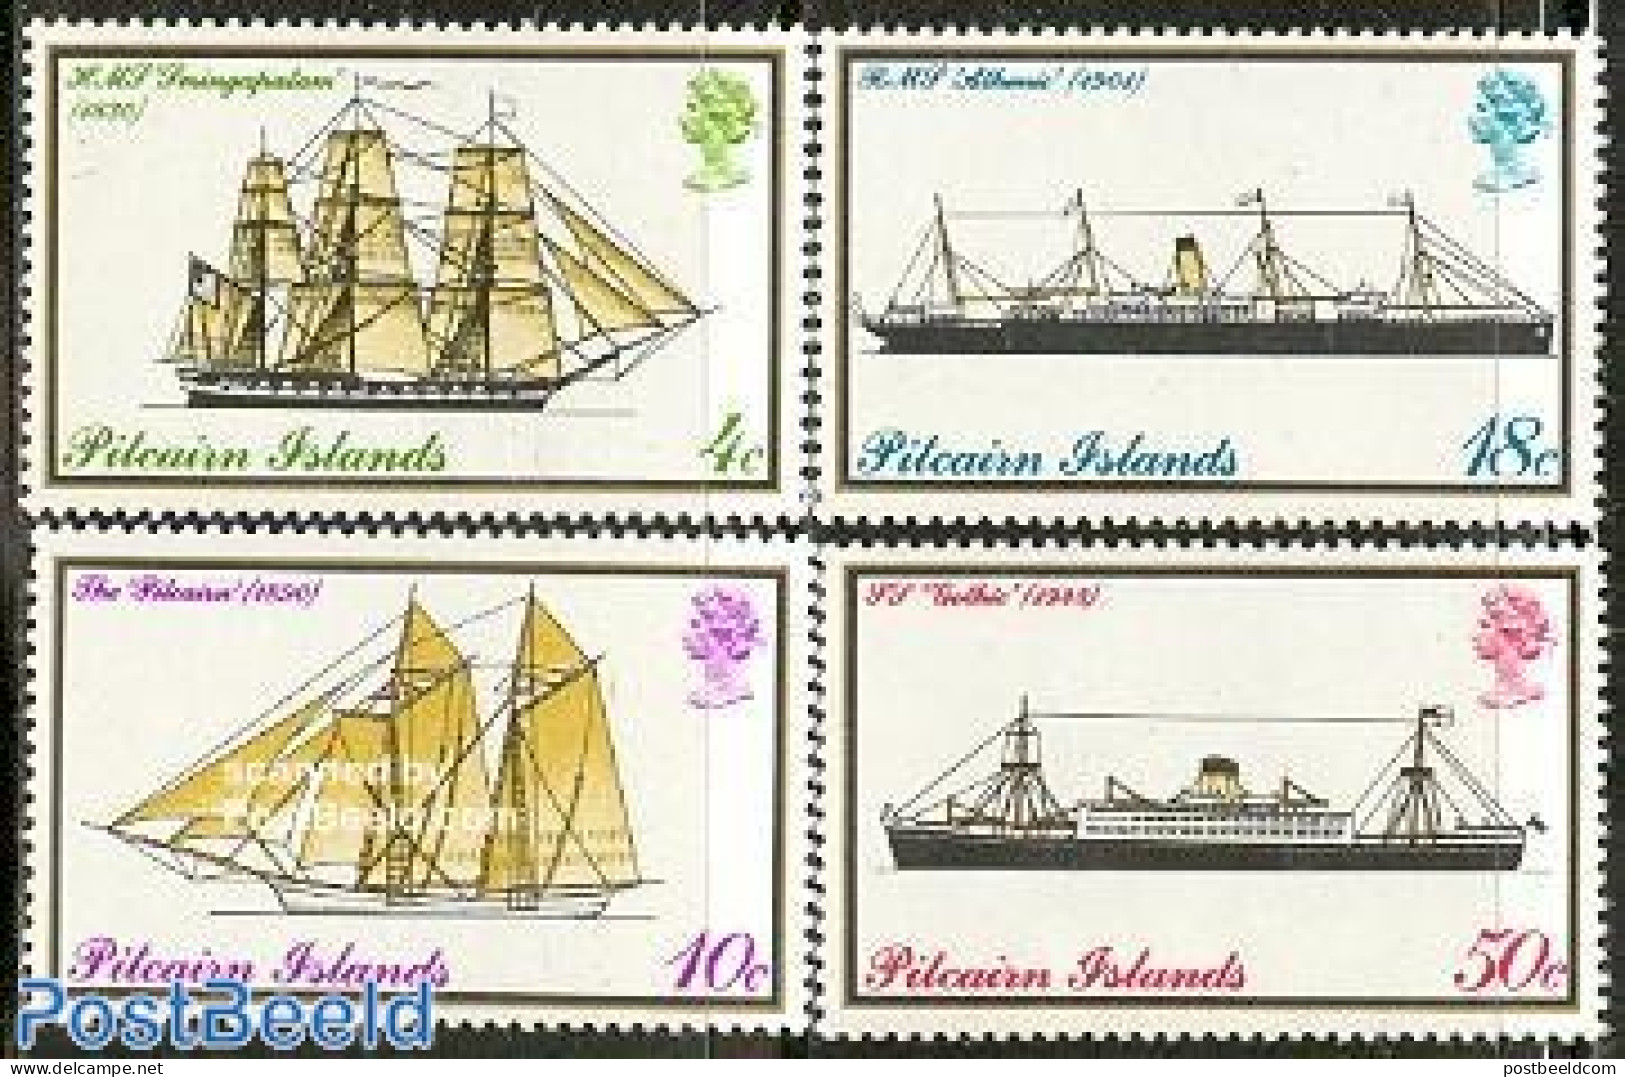 Pitcairn Islands 1975 Ships 4v, Mint NH, Transport - Post - Ships And Boats - Poste